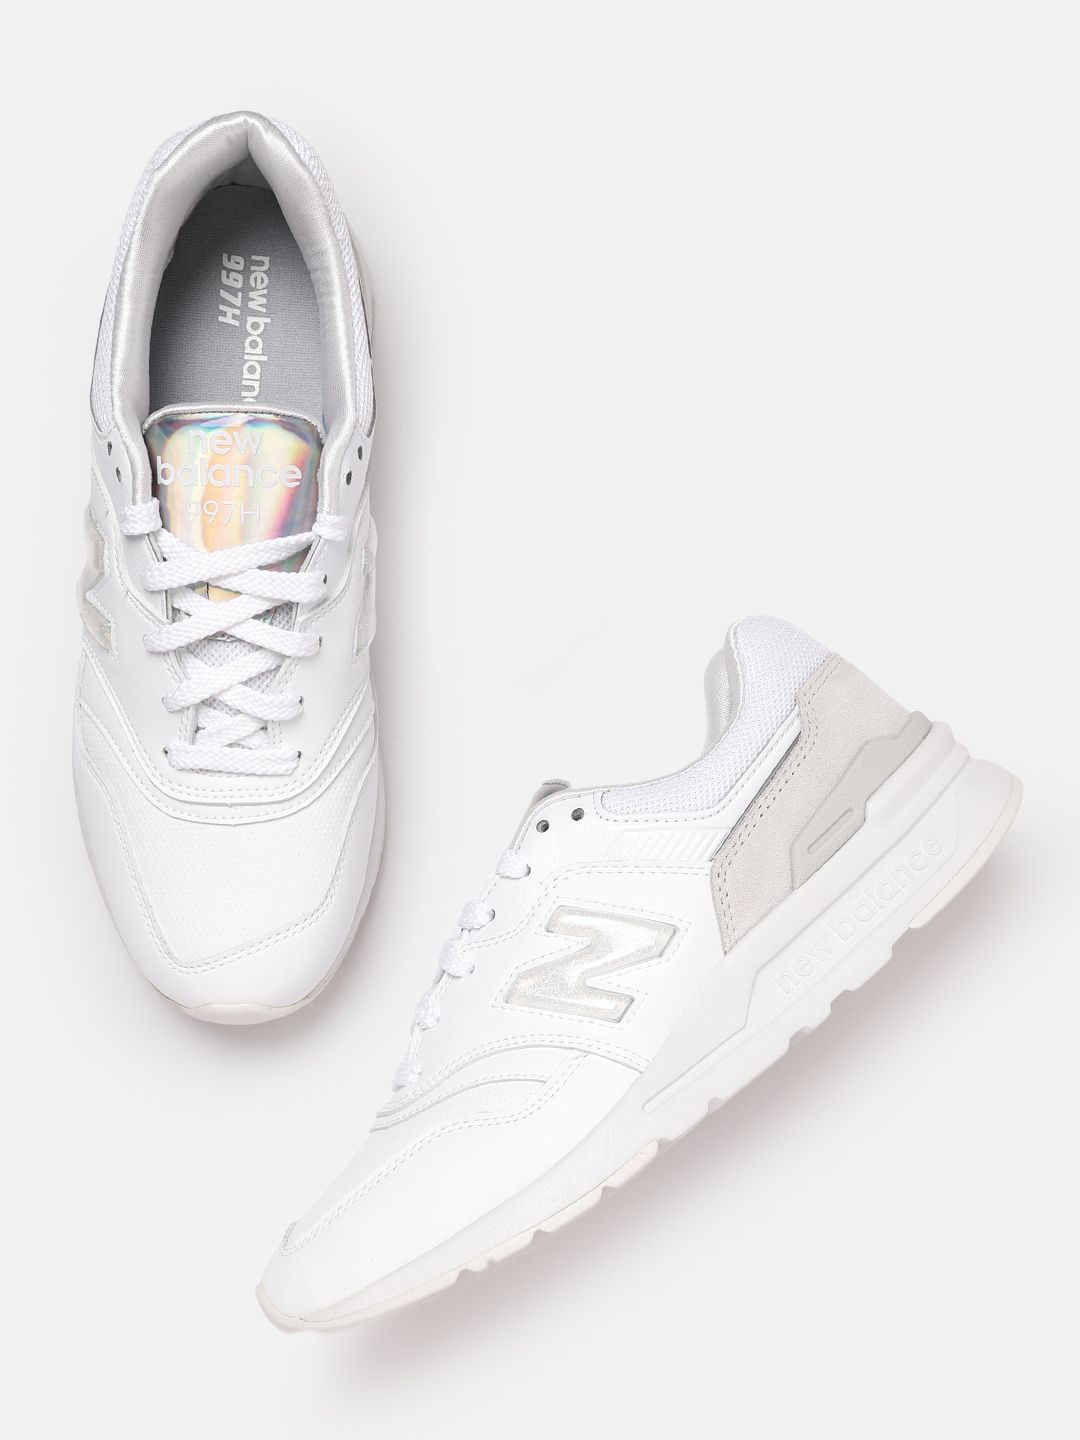 New Balance Women White Perforated Sneakers Price in India